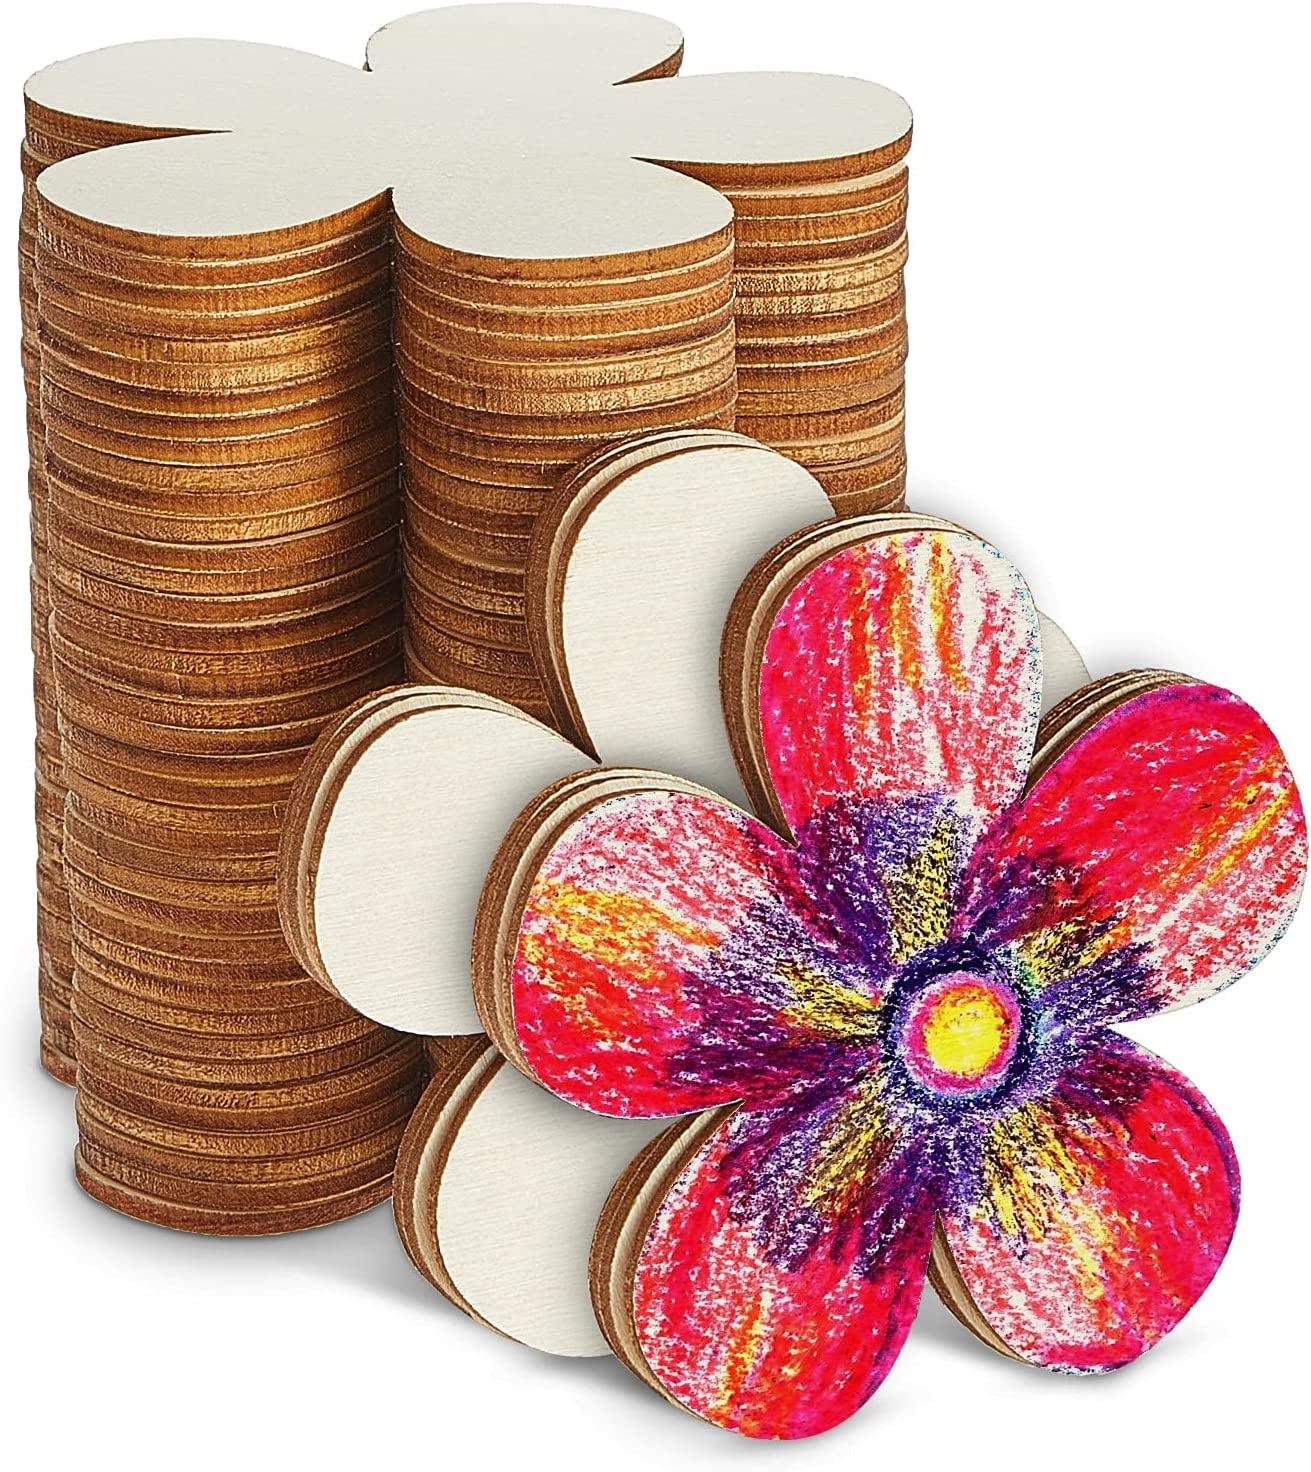 50 Pieces 3 Inch Unfinished Wooden Flower Cutouts Discs Crafts Blank Shape Wood Ornaments Slices for DIY Projects Decoration - WoodArtSupply